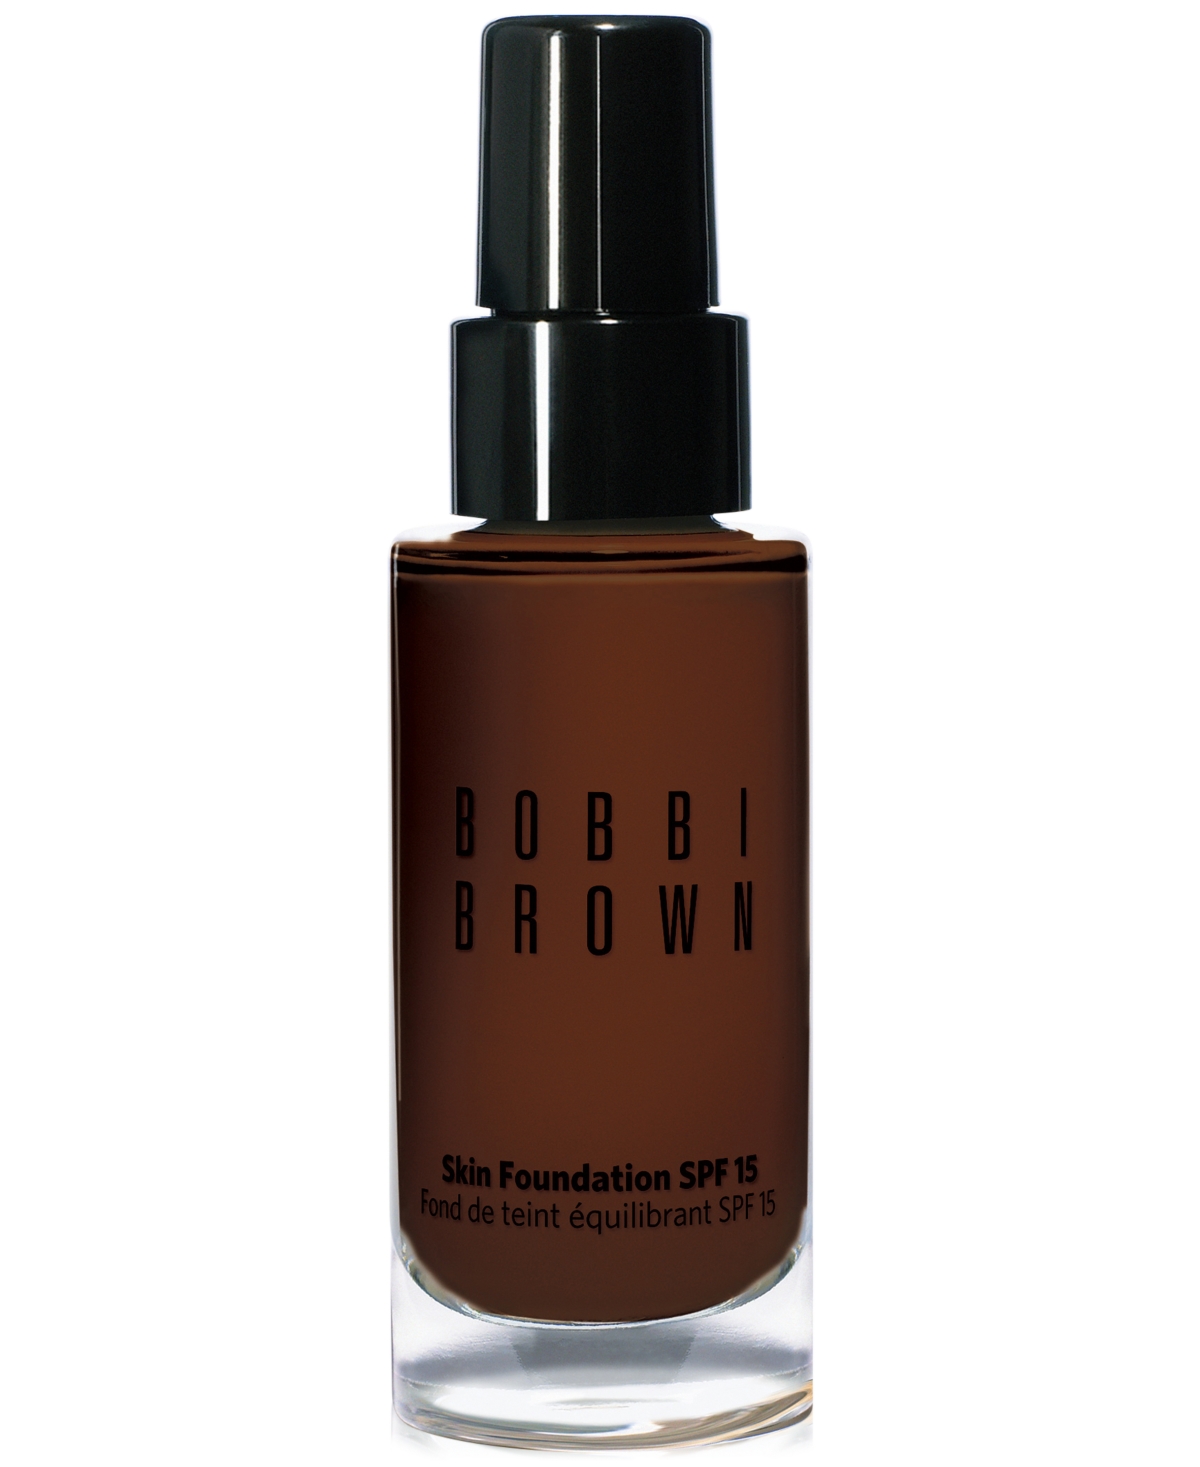 Bobbi Brown Skin Foundation Spf 15, 1 oz In . Espresso (deepest Brown With Red,brown